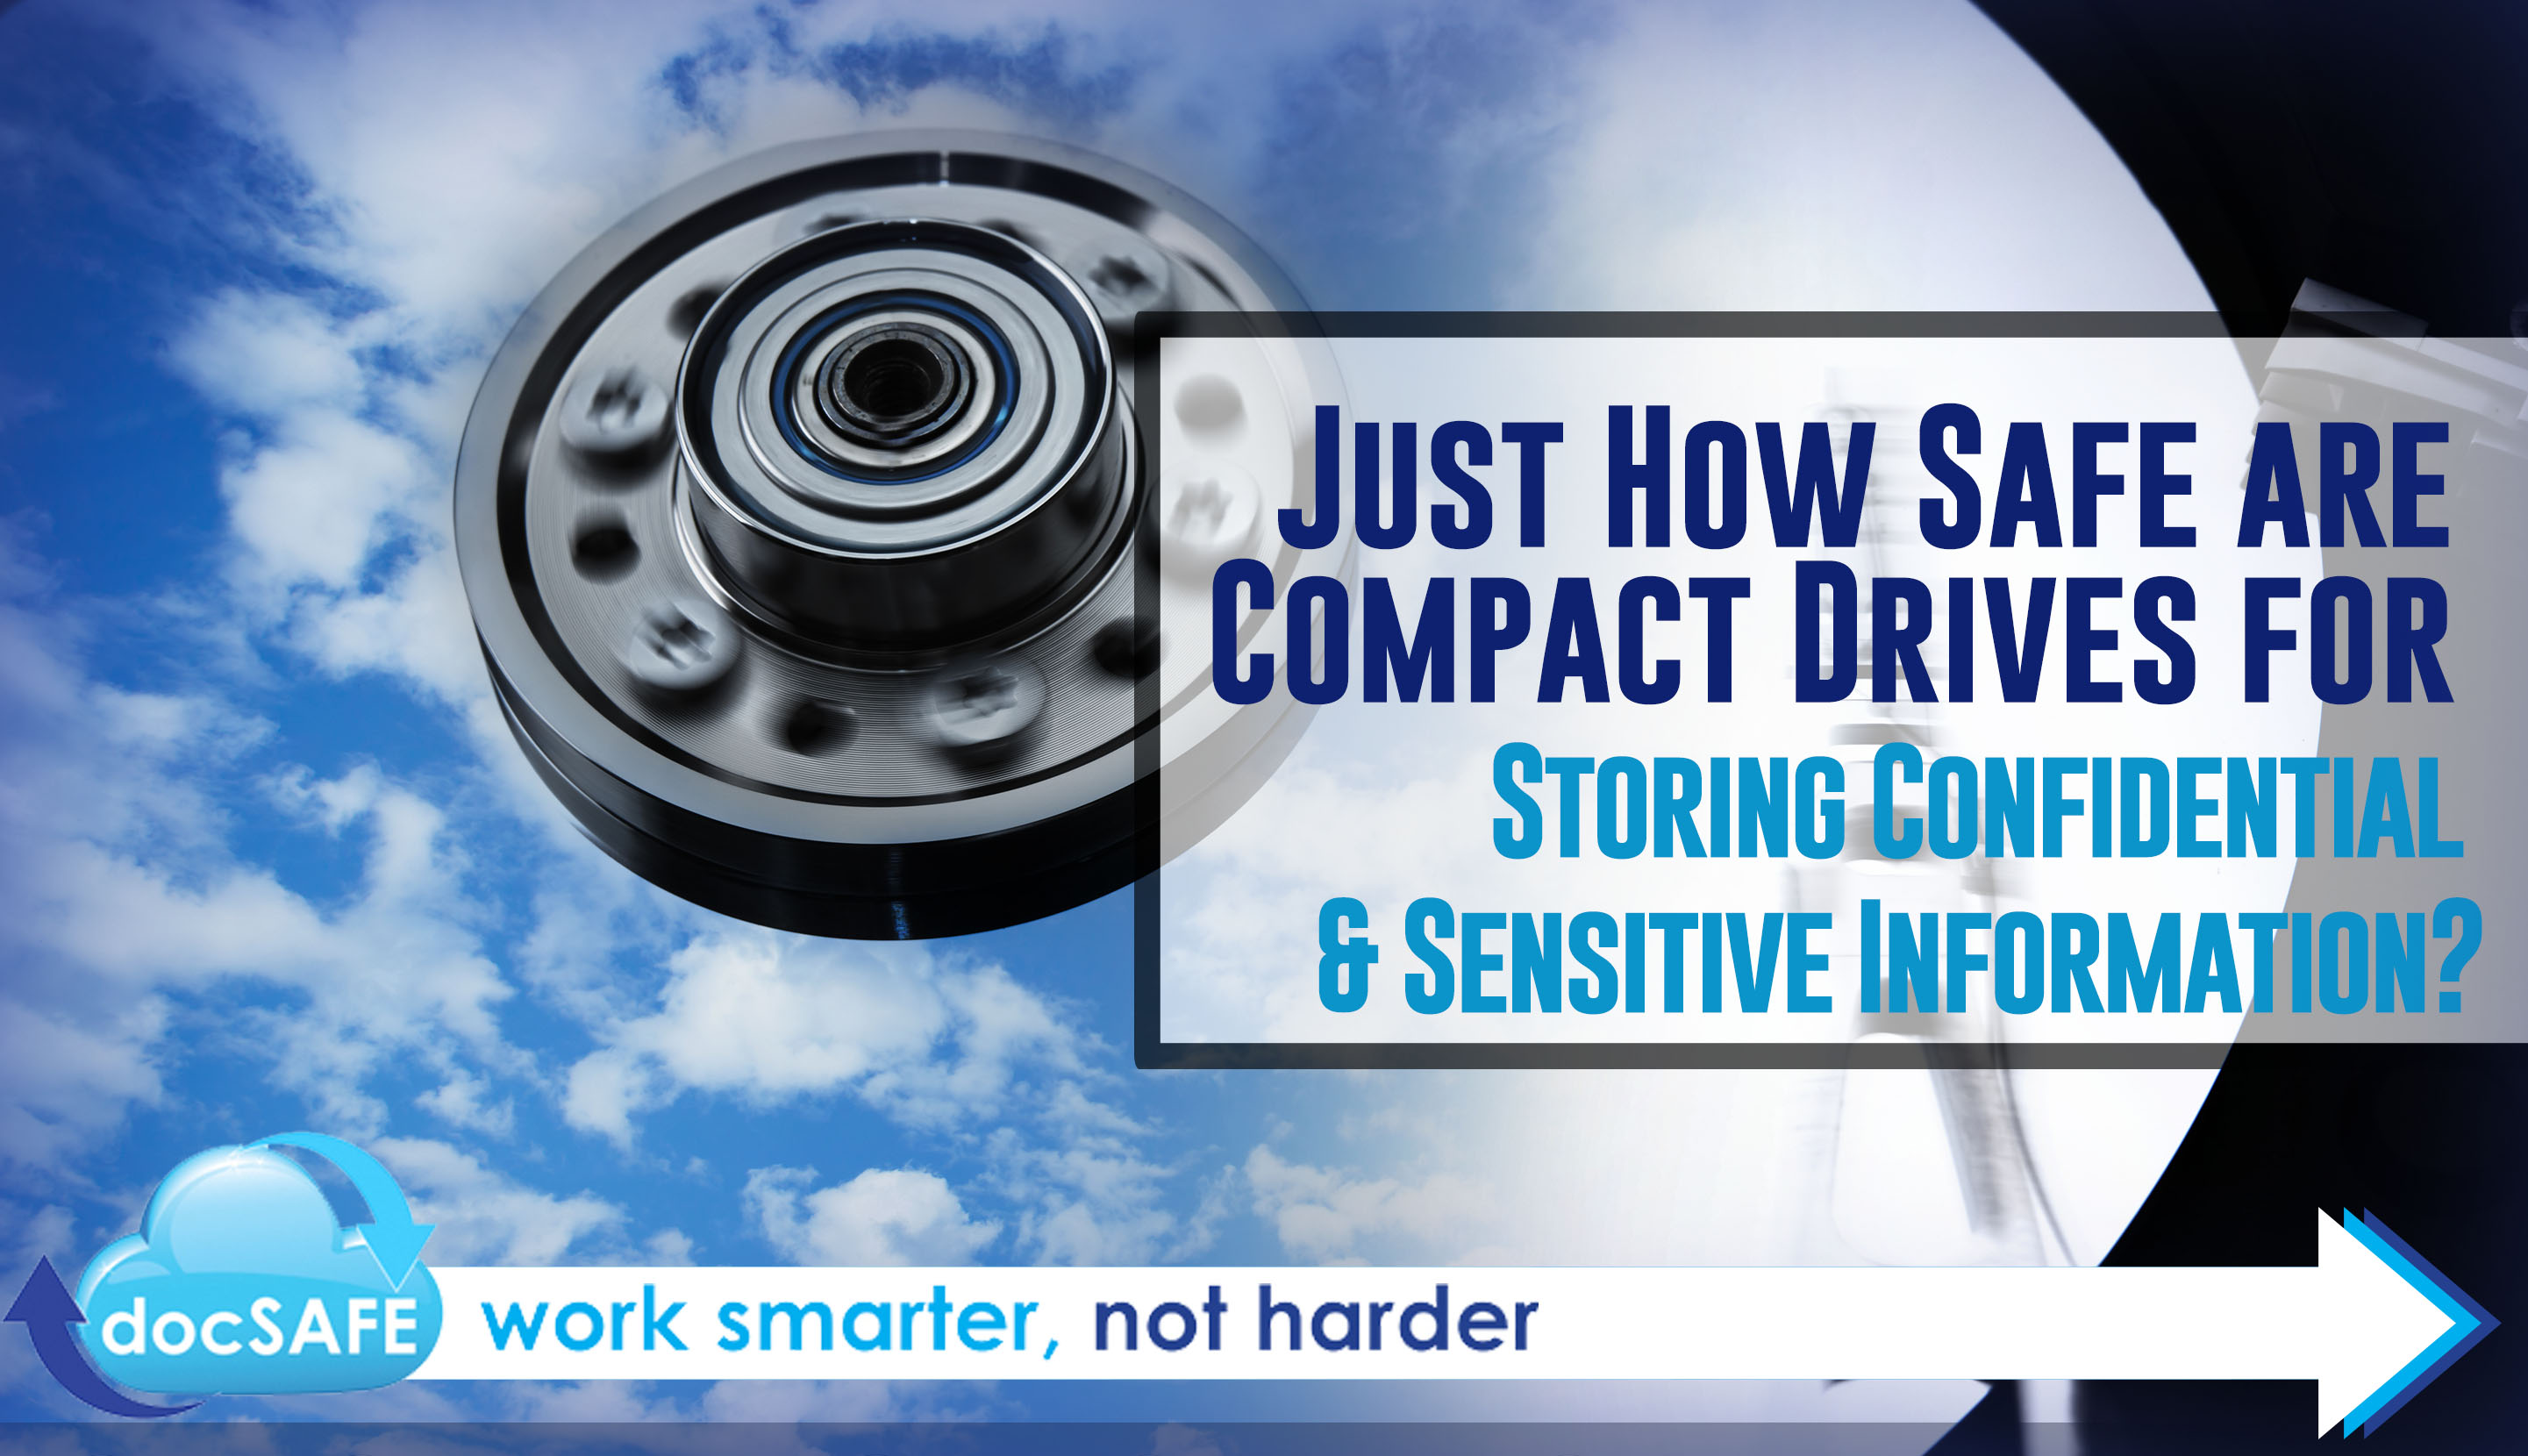 Just How Safe are Compact Drives for Storing Confidential and Sensitive Information?